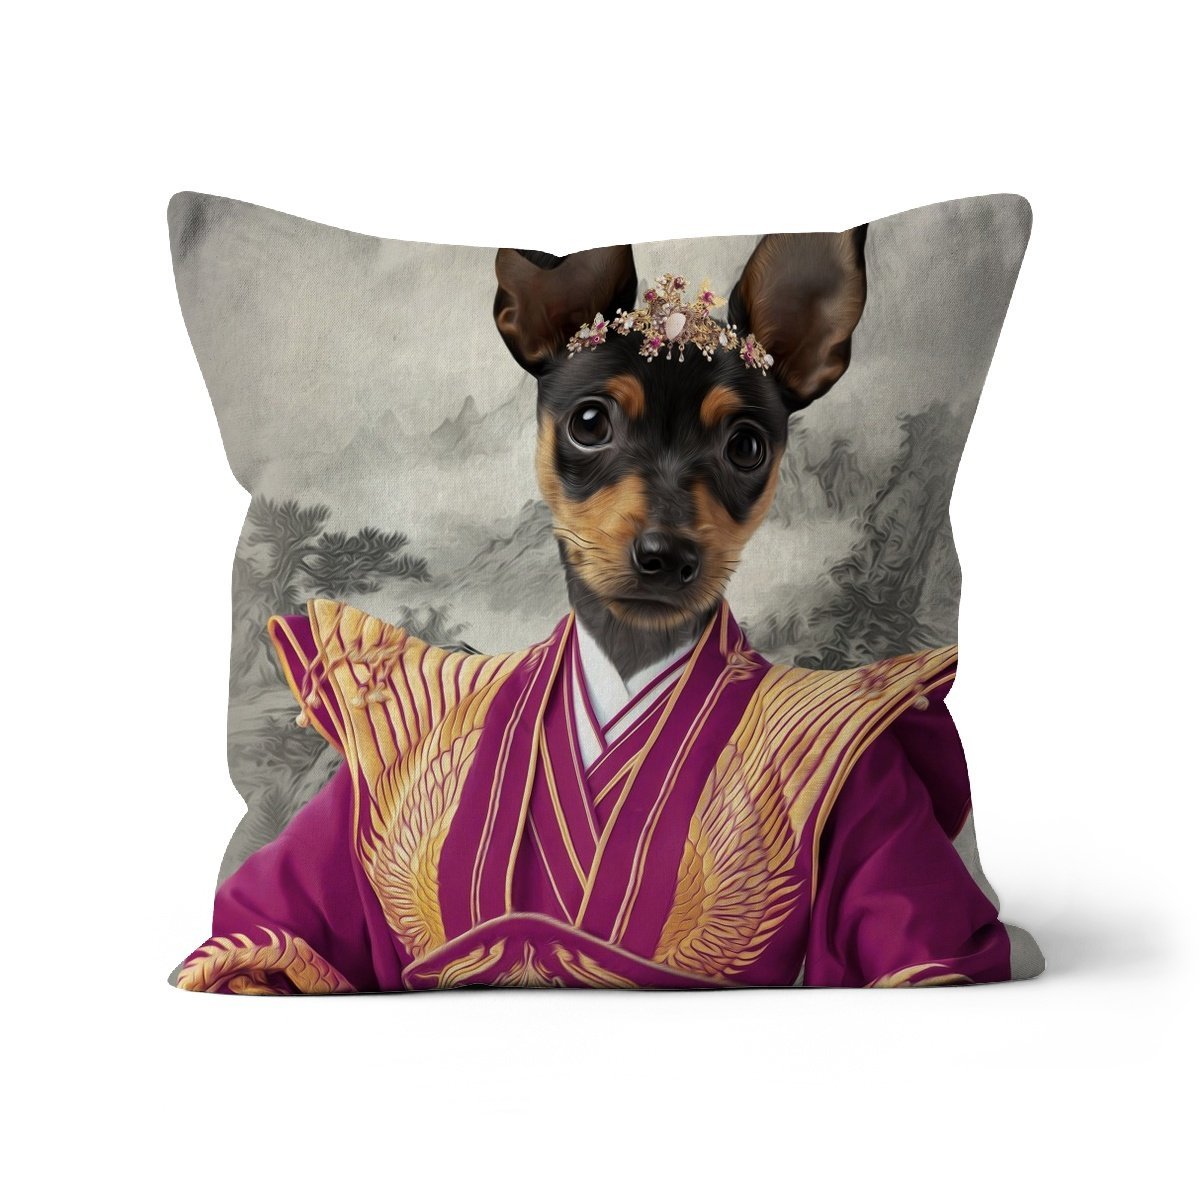 The Chinese Empress: Custom Pet Cushion - Paw & Glory - #pet portraits# - #dog portraits# - #pet portraits uk#paw and glory, pet portraits cushion,dog pillows personalized, pet face pillows, dog photo on pillow, custom cat pillows, pillow with pet picture